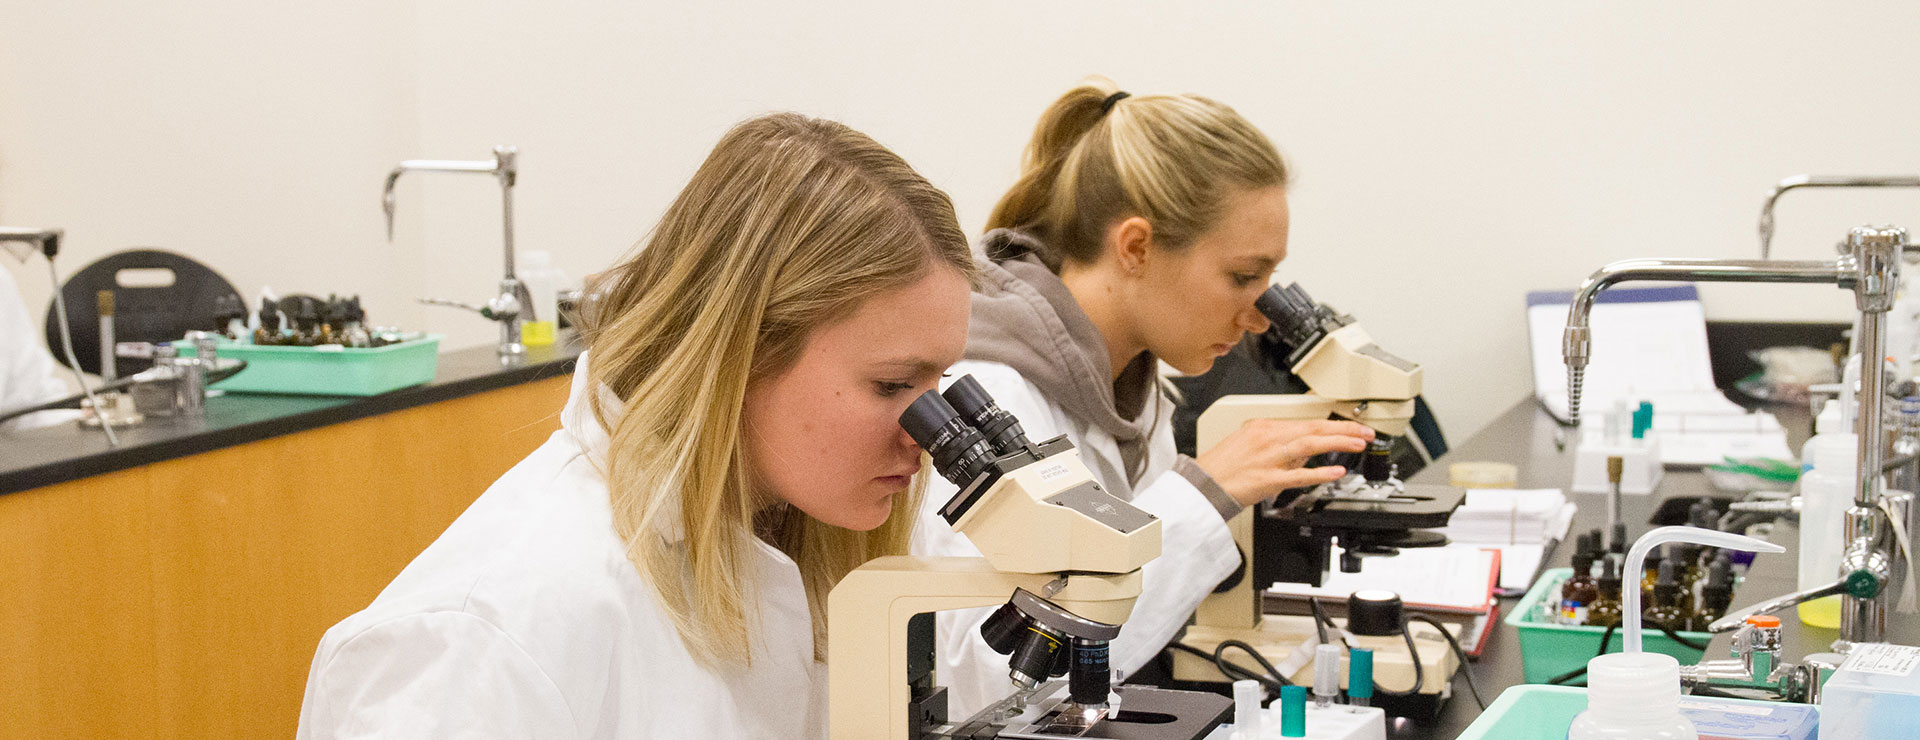 Female students using microscopes in science lab class